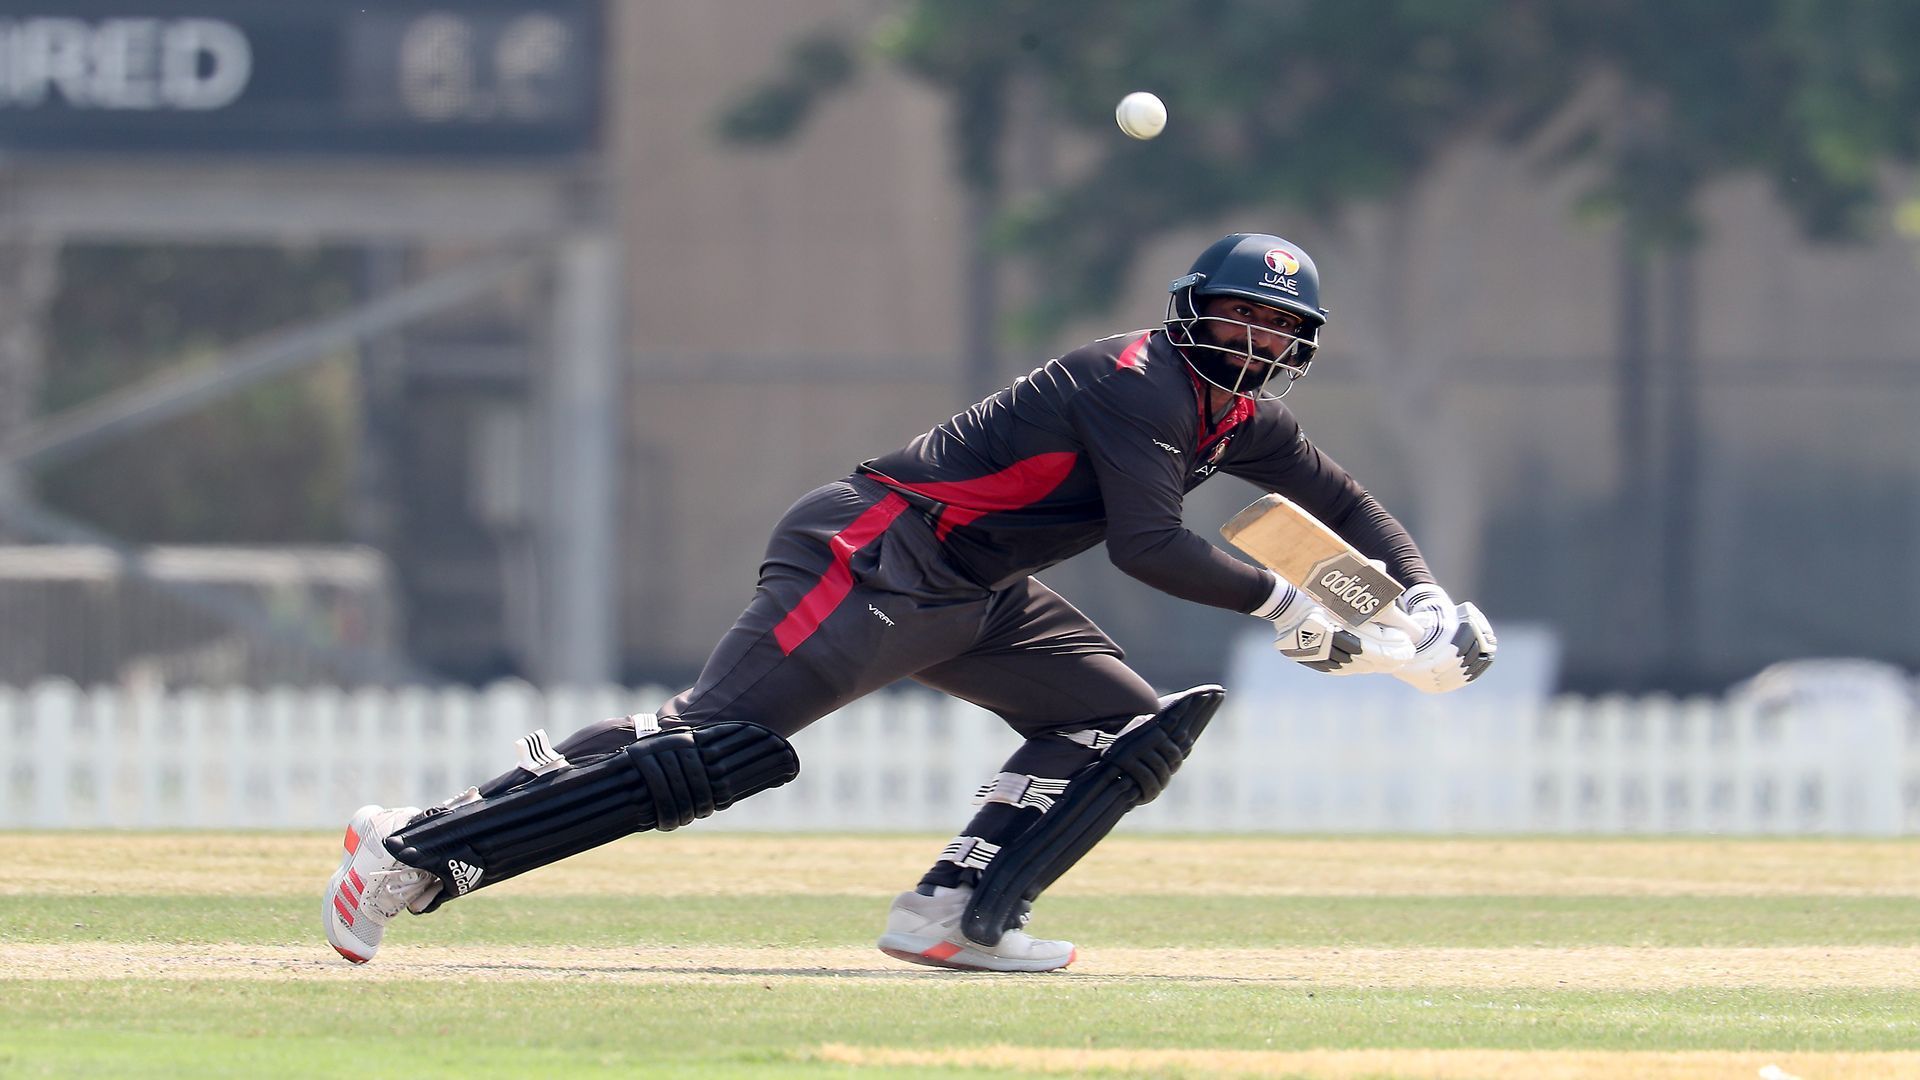 Muhammad Waseem will be the key batter for UAE